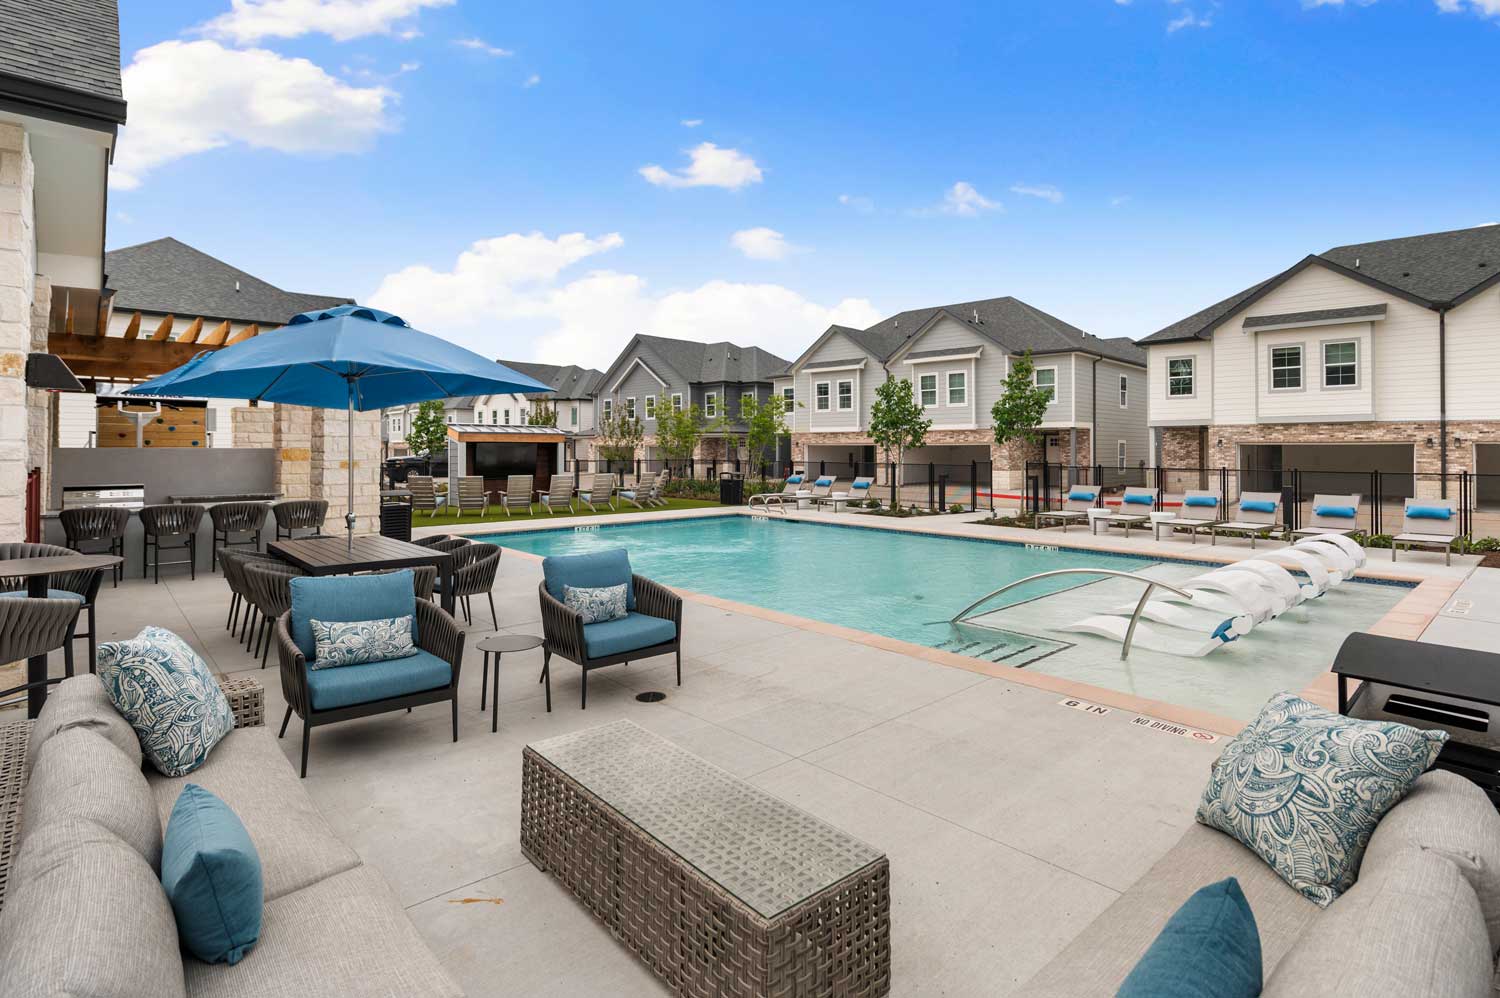 Villas at Birnham Woods; Two, Three and Four Bedroom Townhomes in Spring, TX near Houston, Tomball, Conroe, and The Woodlands; Pet-friendly luxury apartment community.